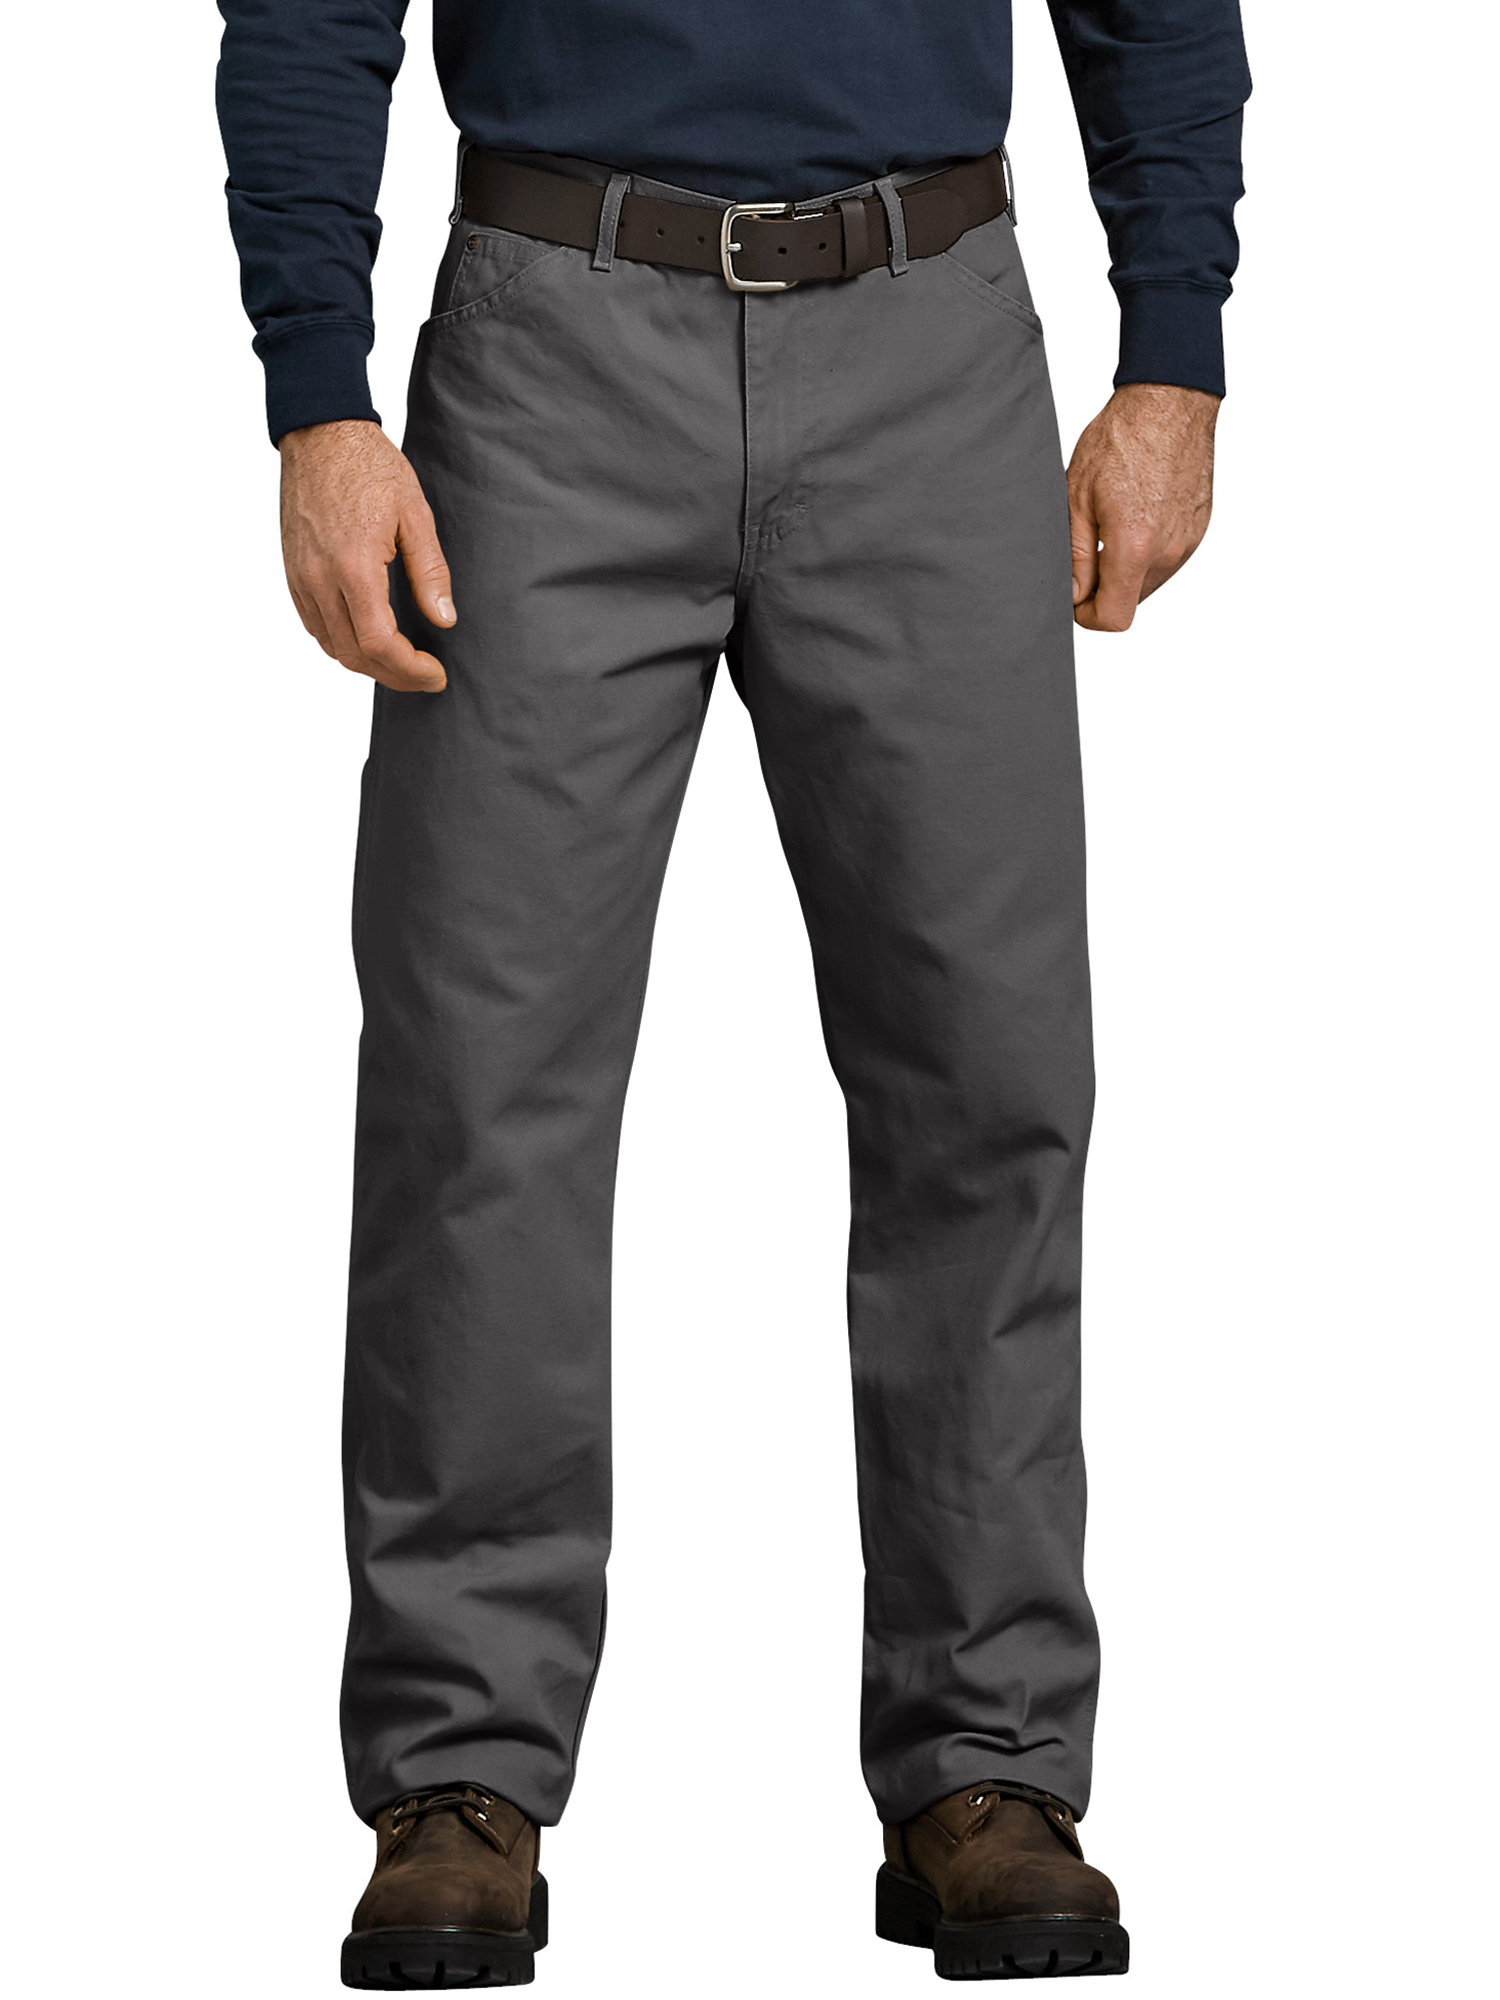 Dickies Mens and Big Mens Relaxed Fit Duck Carpenter Jean - image 1 of 2